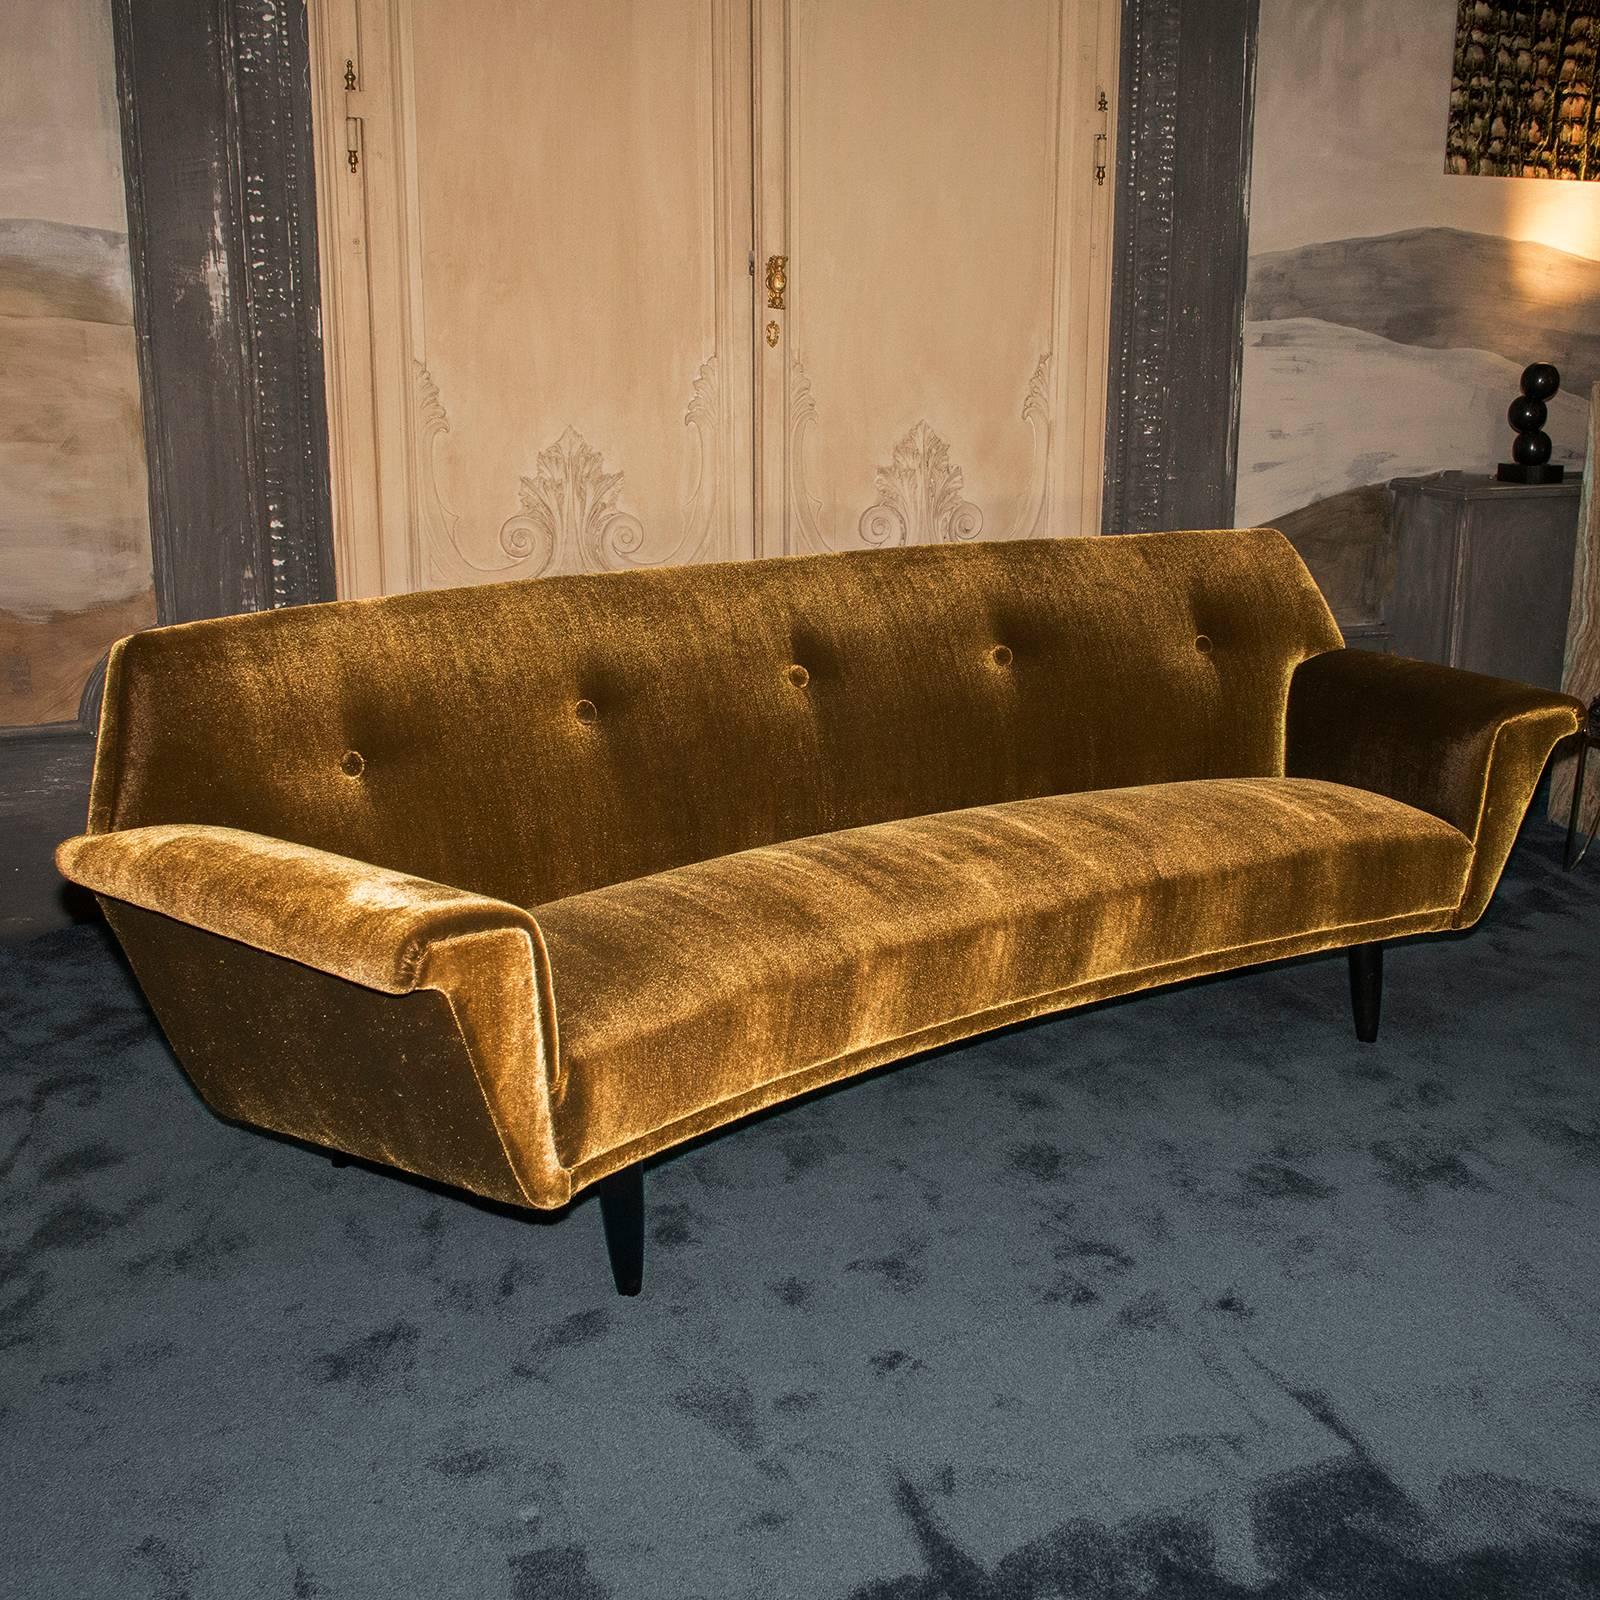 Italian curved sofa, vintage structure and newly reupholstered with dark gold velvet fabric, black wood details.
 